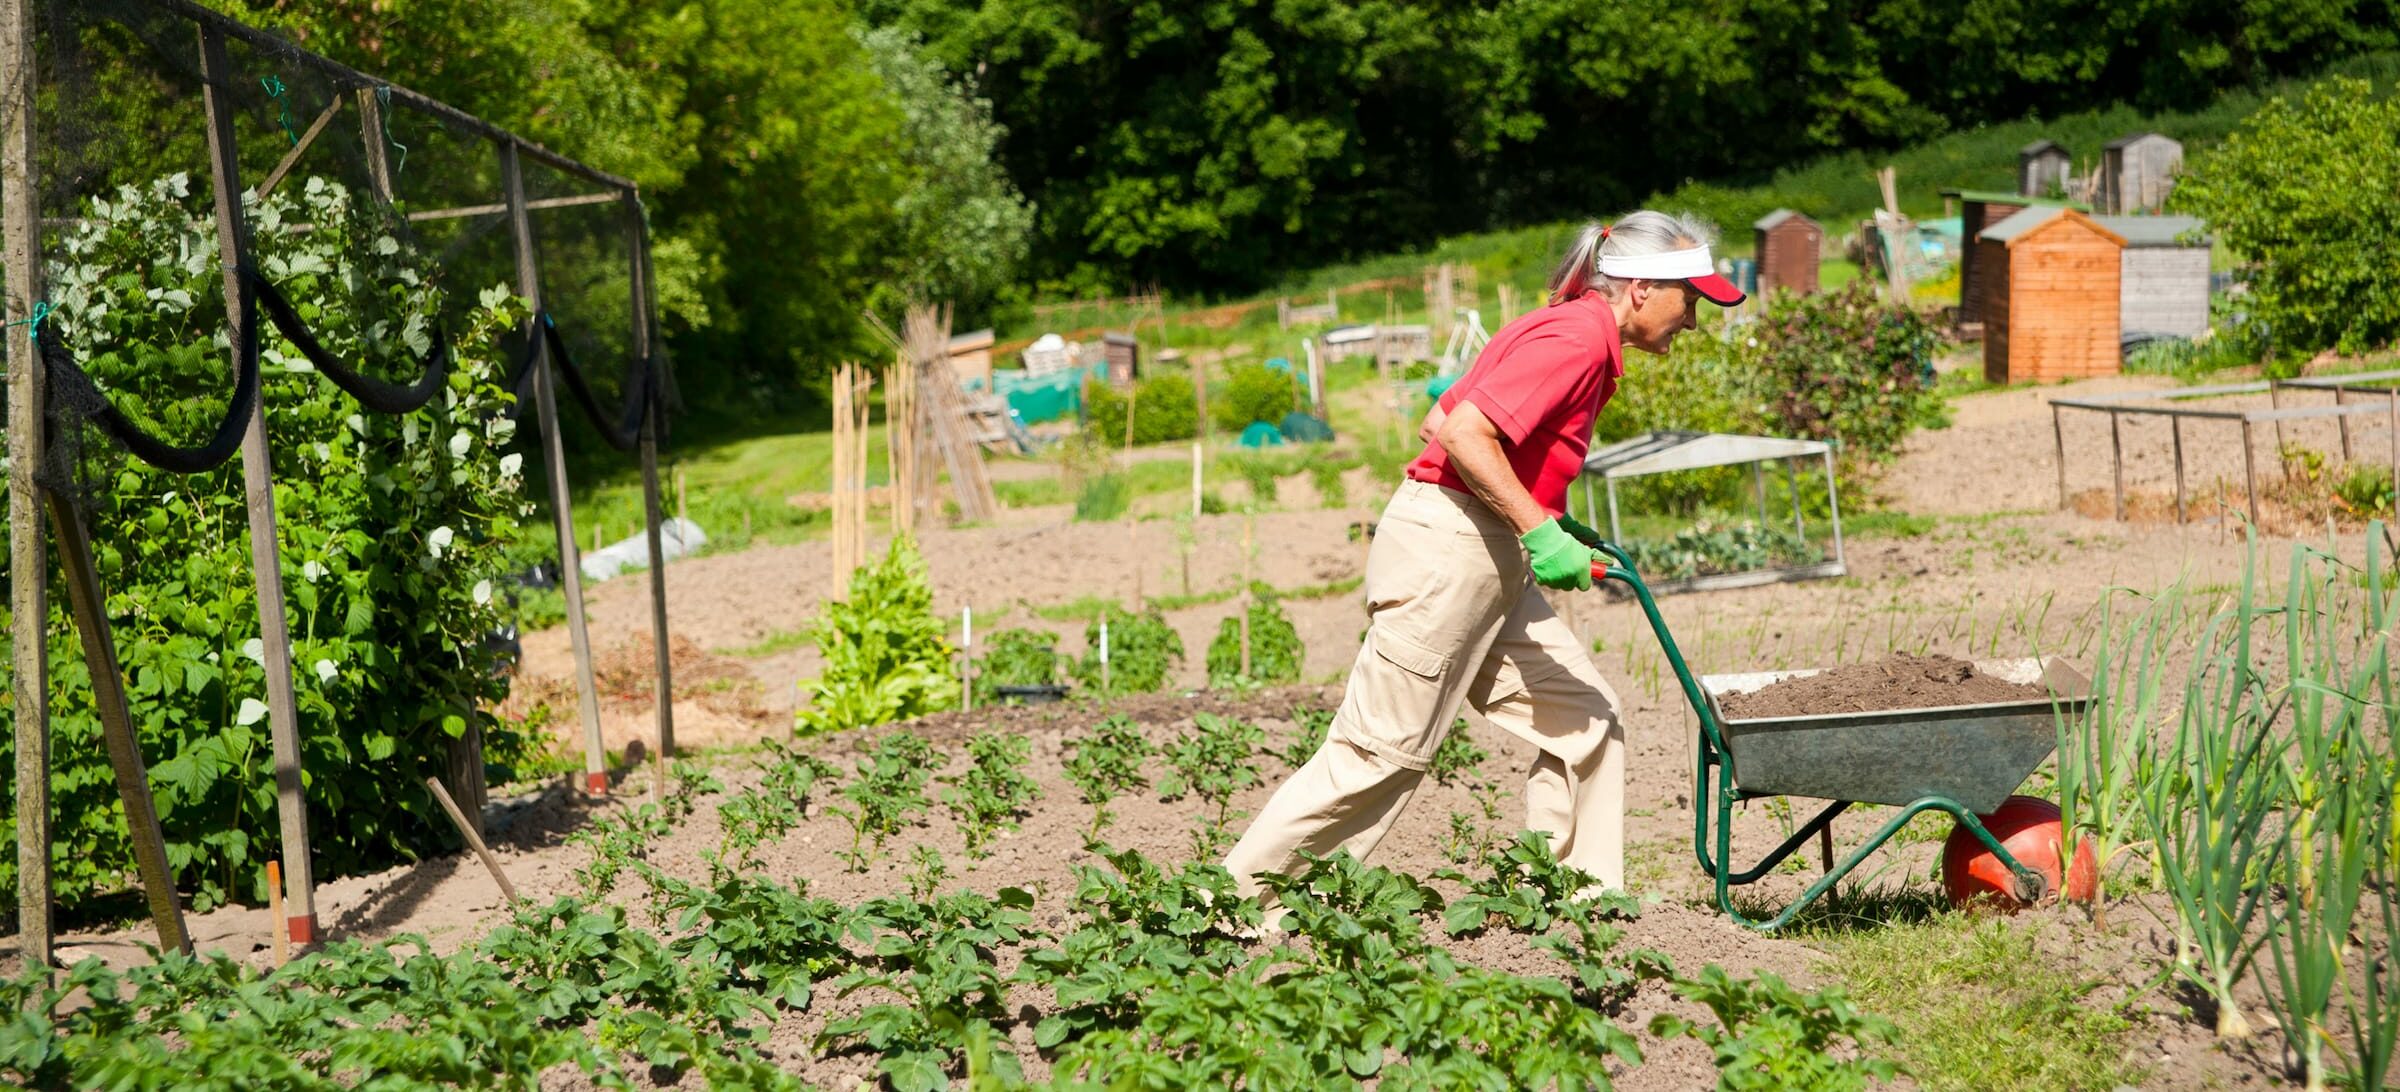 7 Surprising Ways Gardening Boosts Your Health And Wellbeing